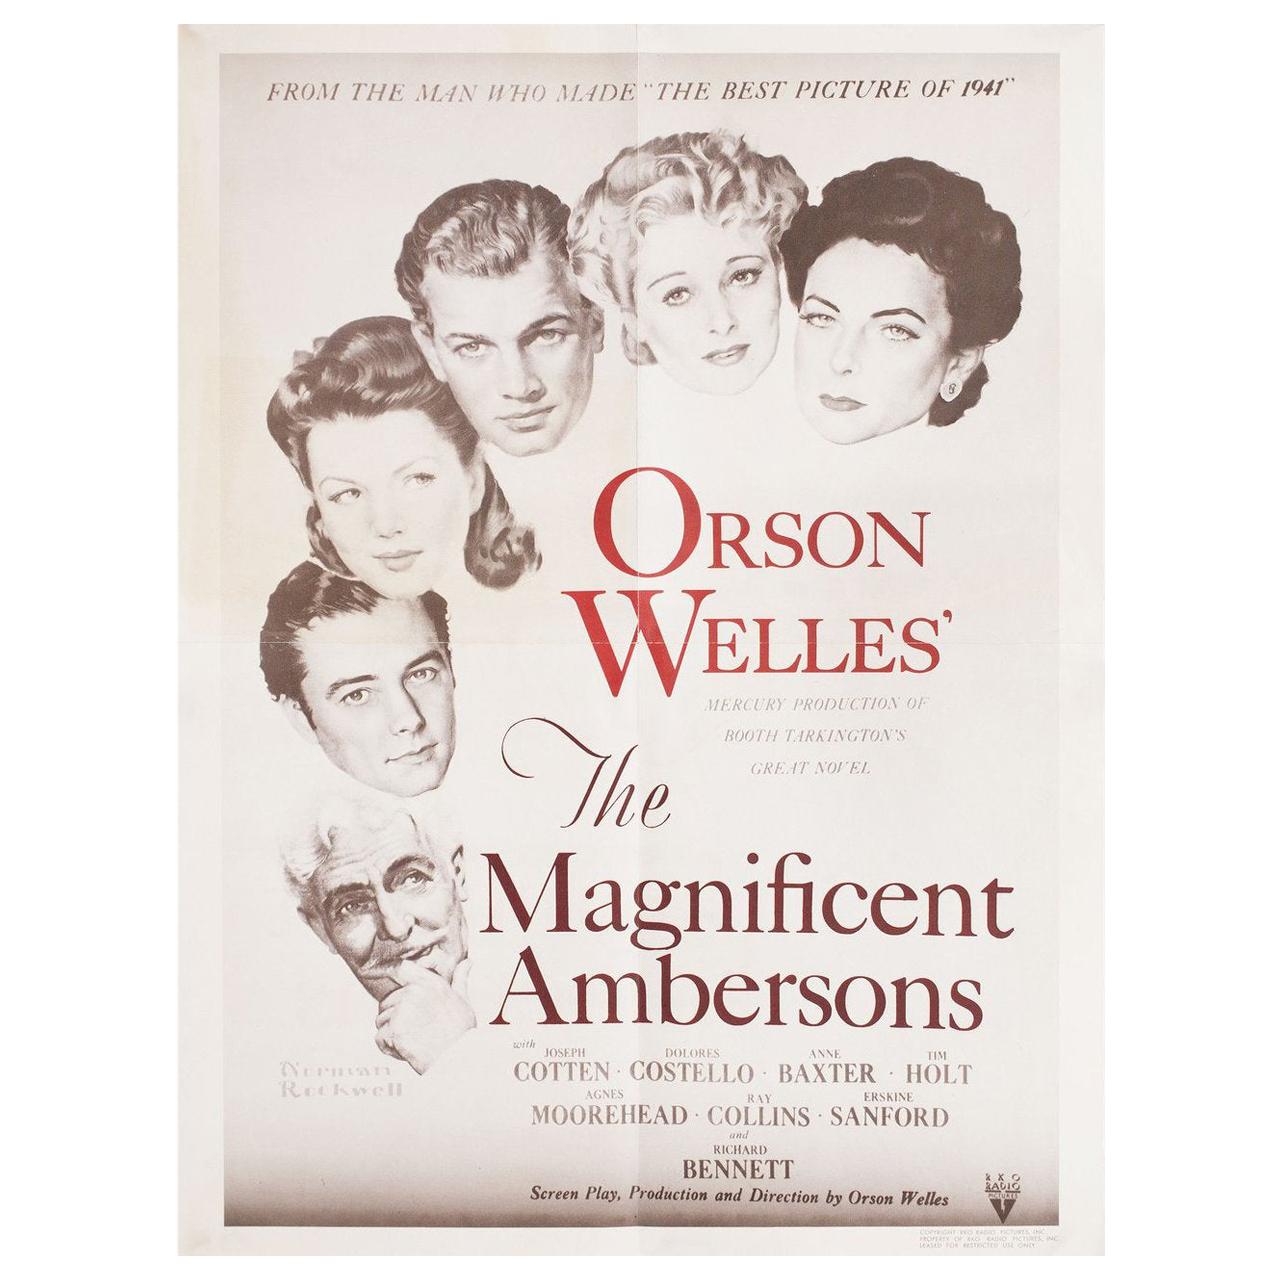 The Magnificent Ambersons R1960s U.S. Film Poster For Sale